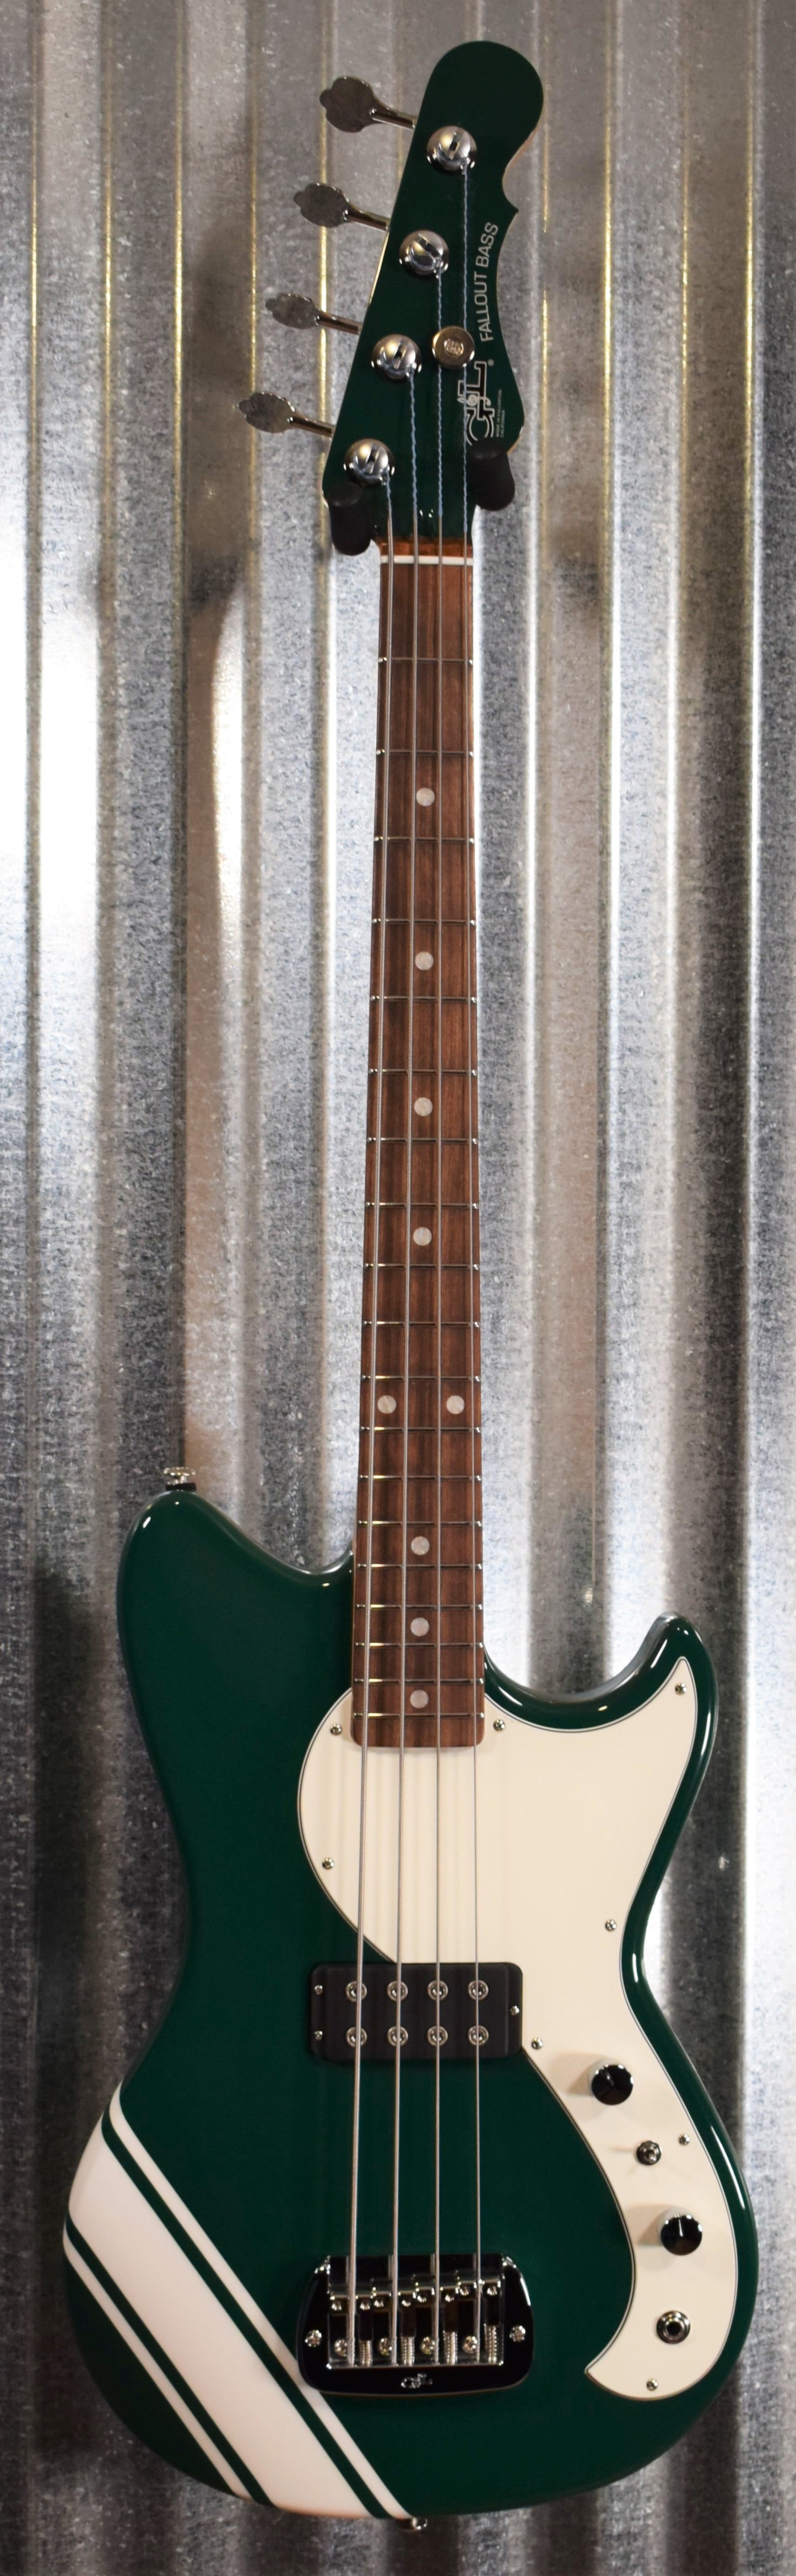 G&L USA Fullerton Limited Edition Fallout Bass British Racing Green 4 String Short Scale & Gig Bag #0203